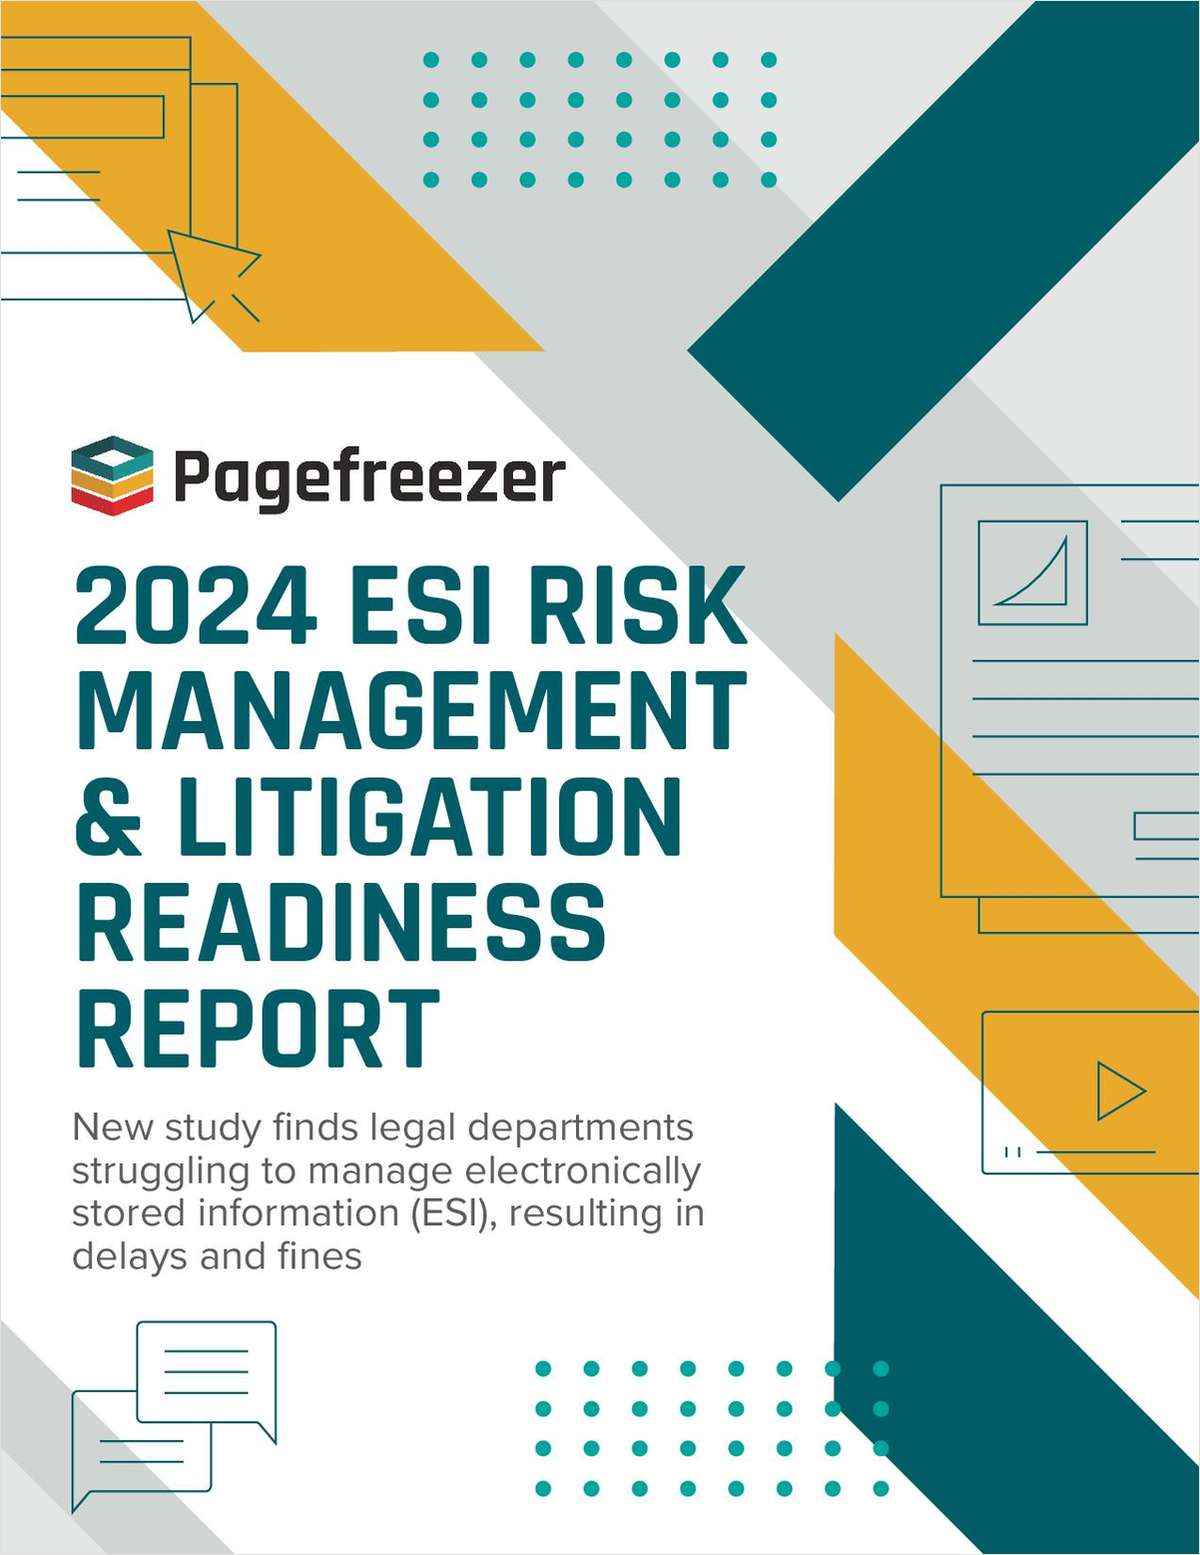 A new study finds legal departments struggling to manage electronically stored information (ESI), resulting in delays and fines. Download this comprehensive report and discover expert strategies to reduce risks and enhance efficiency.